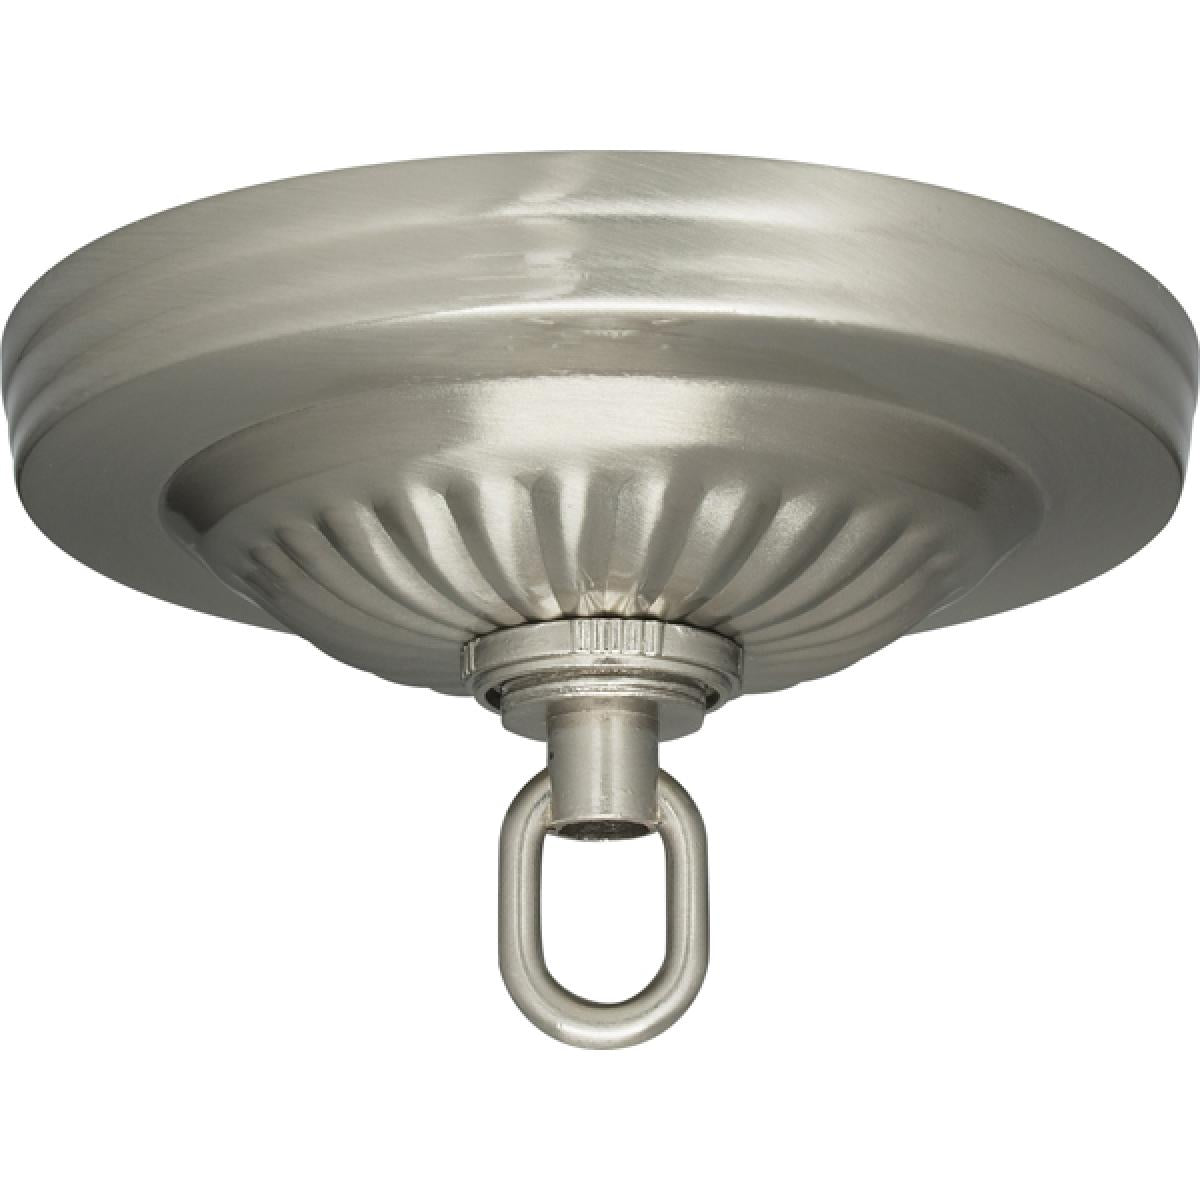 Satco 90-1846 Ribbed Canopy Kit Brushed Nickel Finish 5" Diameter 1-1/16" Center Hole Includes Hardware 25lbs Max